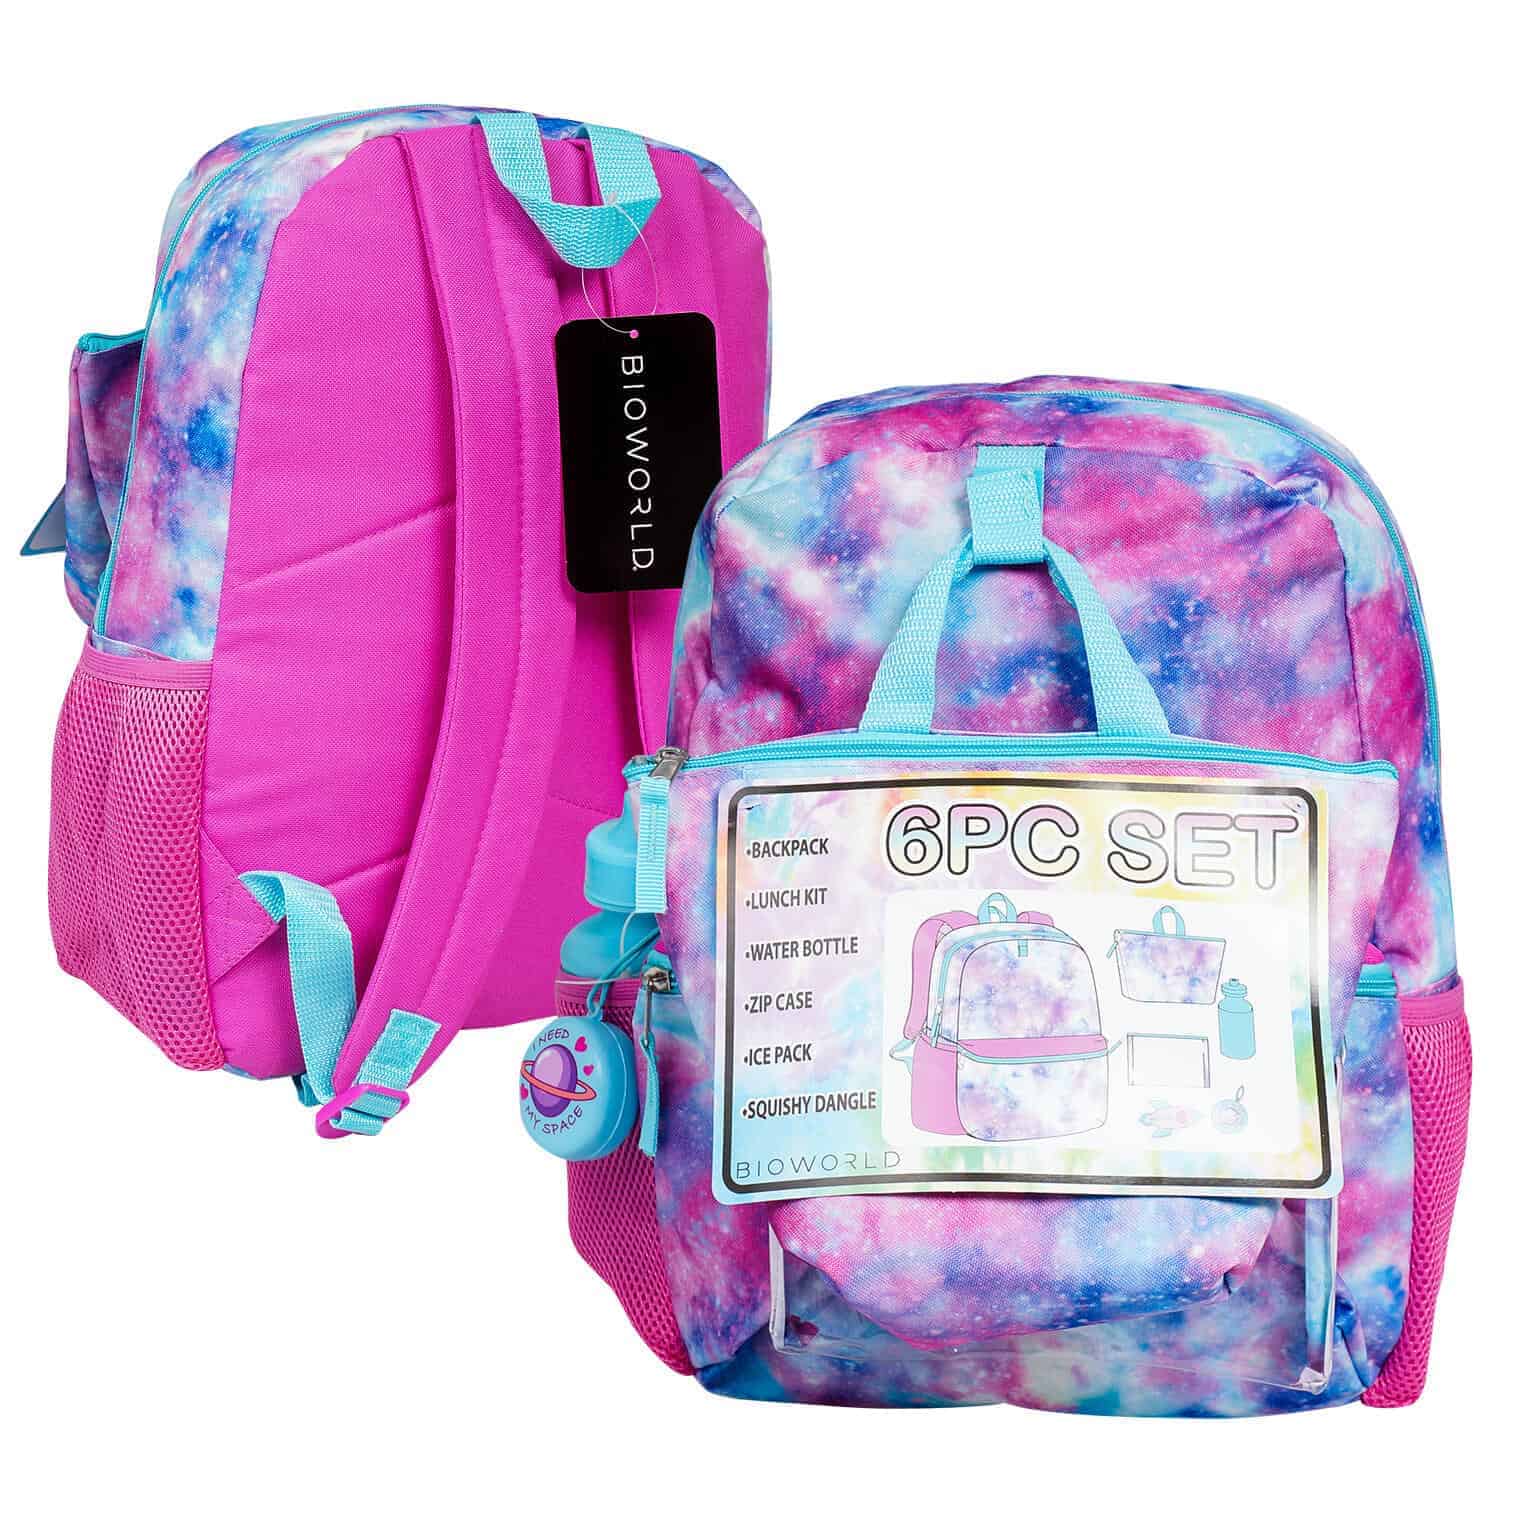 This Tie Dye Backpack 6 Piece Set 16 inch (41cm) with Lunch Bag Ice Pack Zipper Case is made with love by Premier Homegoods! Shop more unique gift ideas today with Spots Initiatives, the best way to support creators.